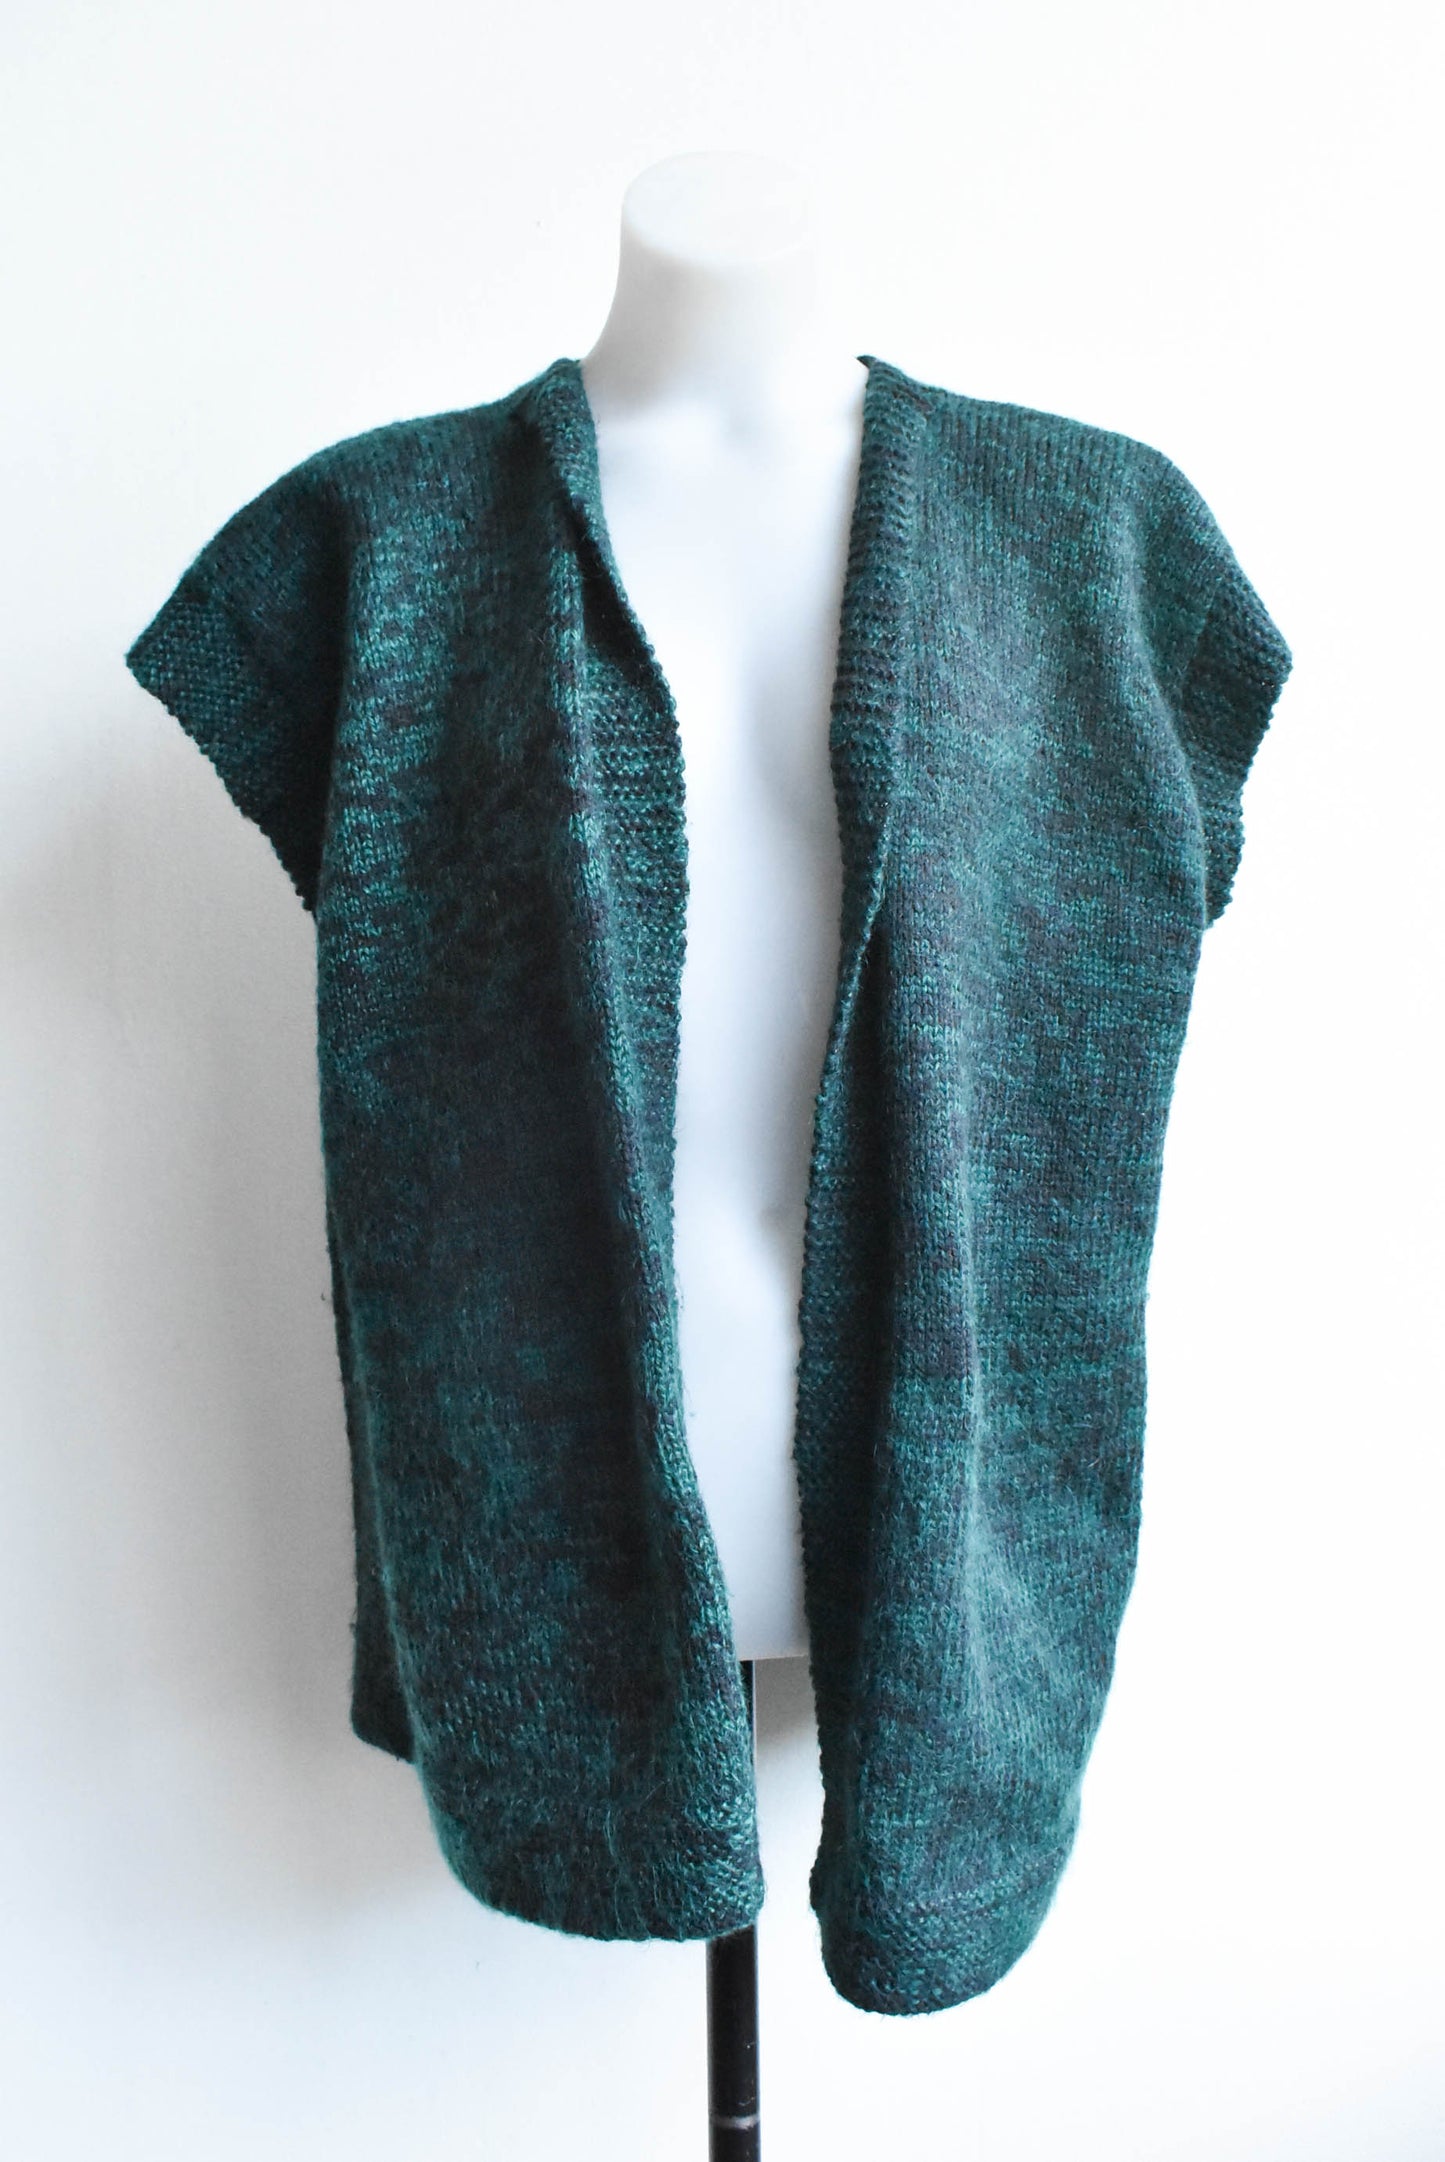 Handknitted green and black variegated shrug